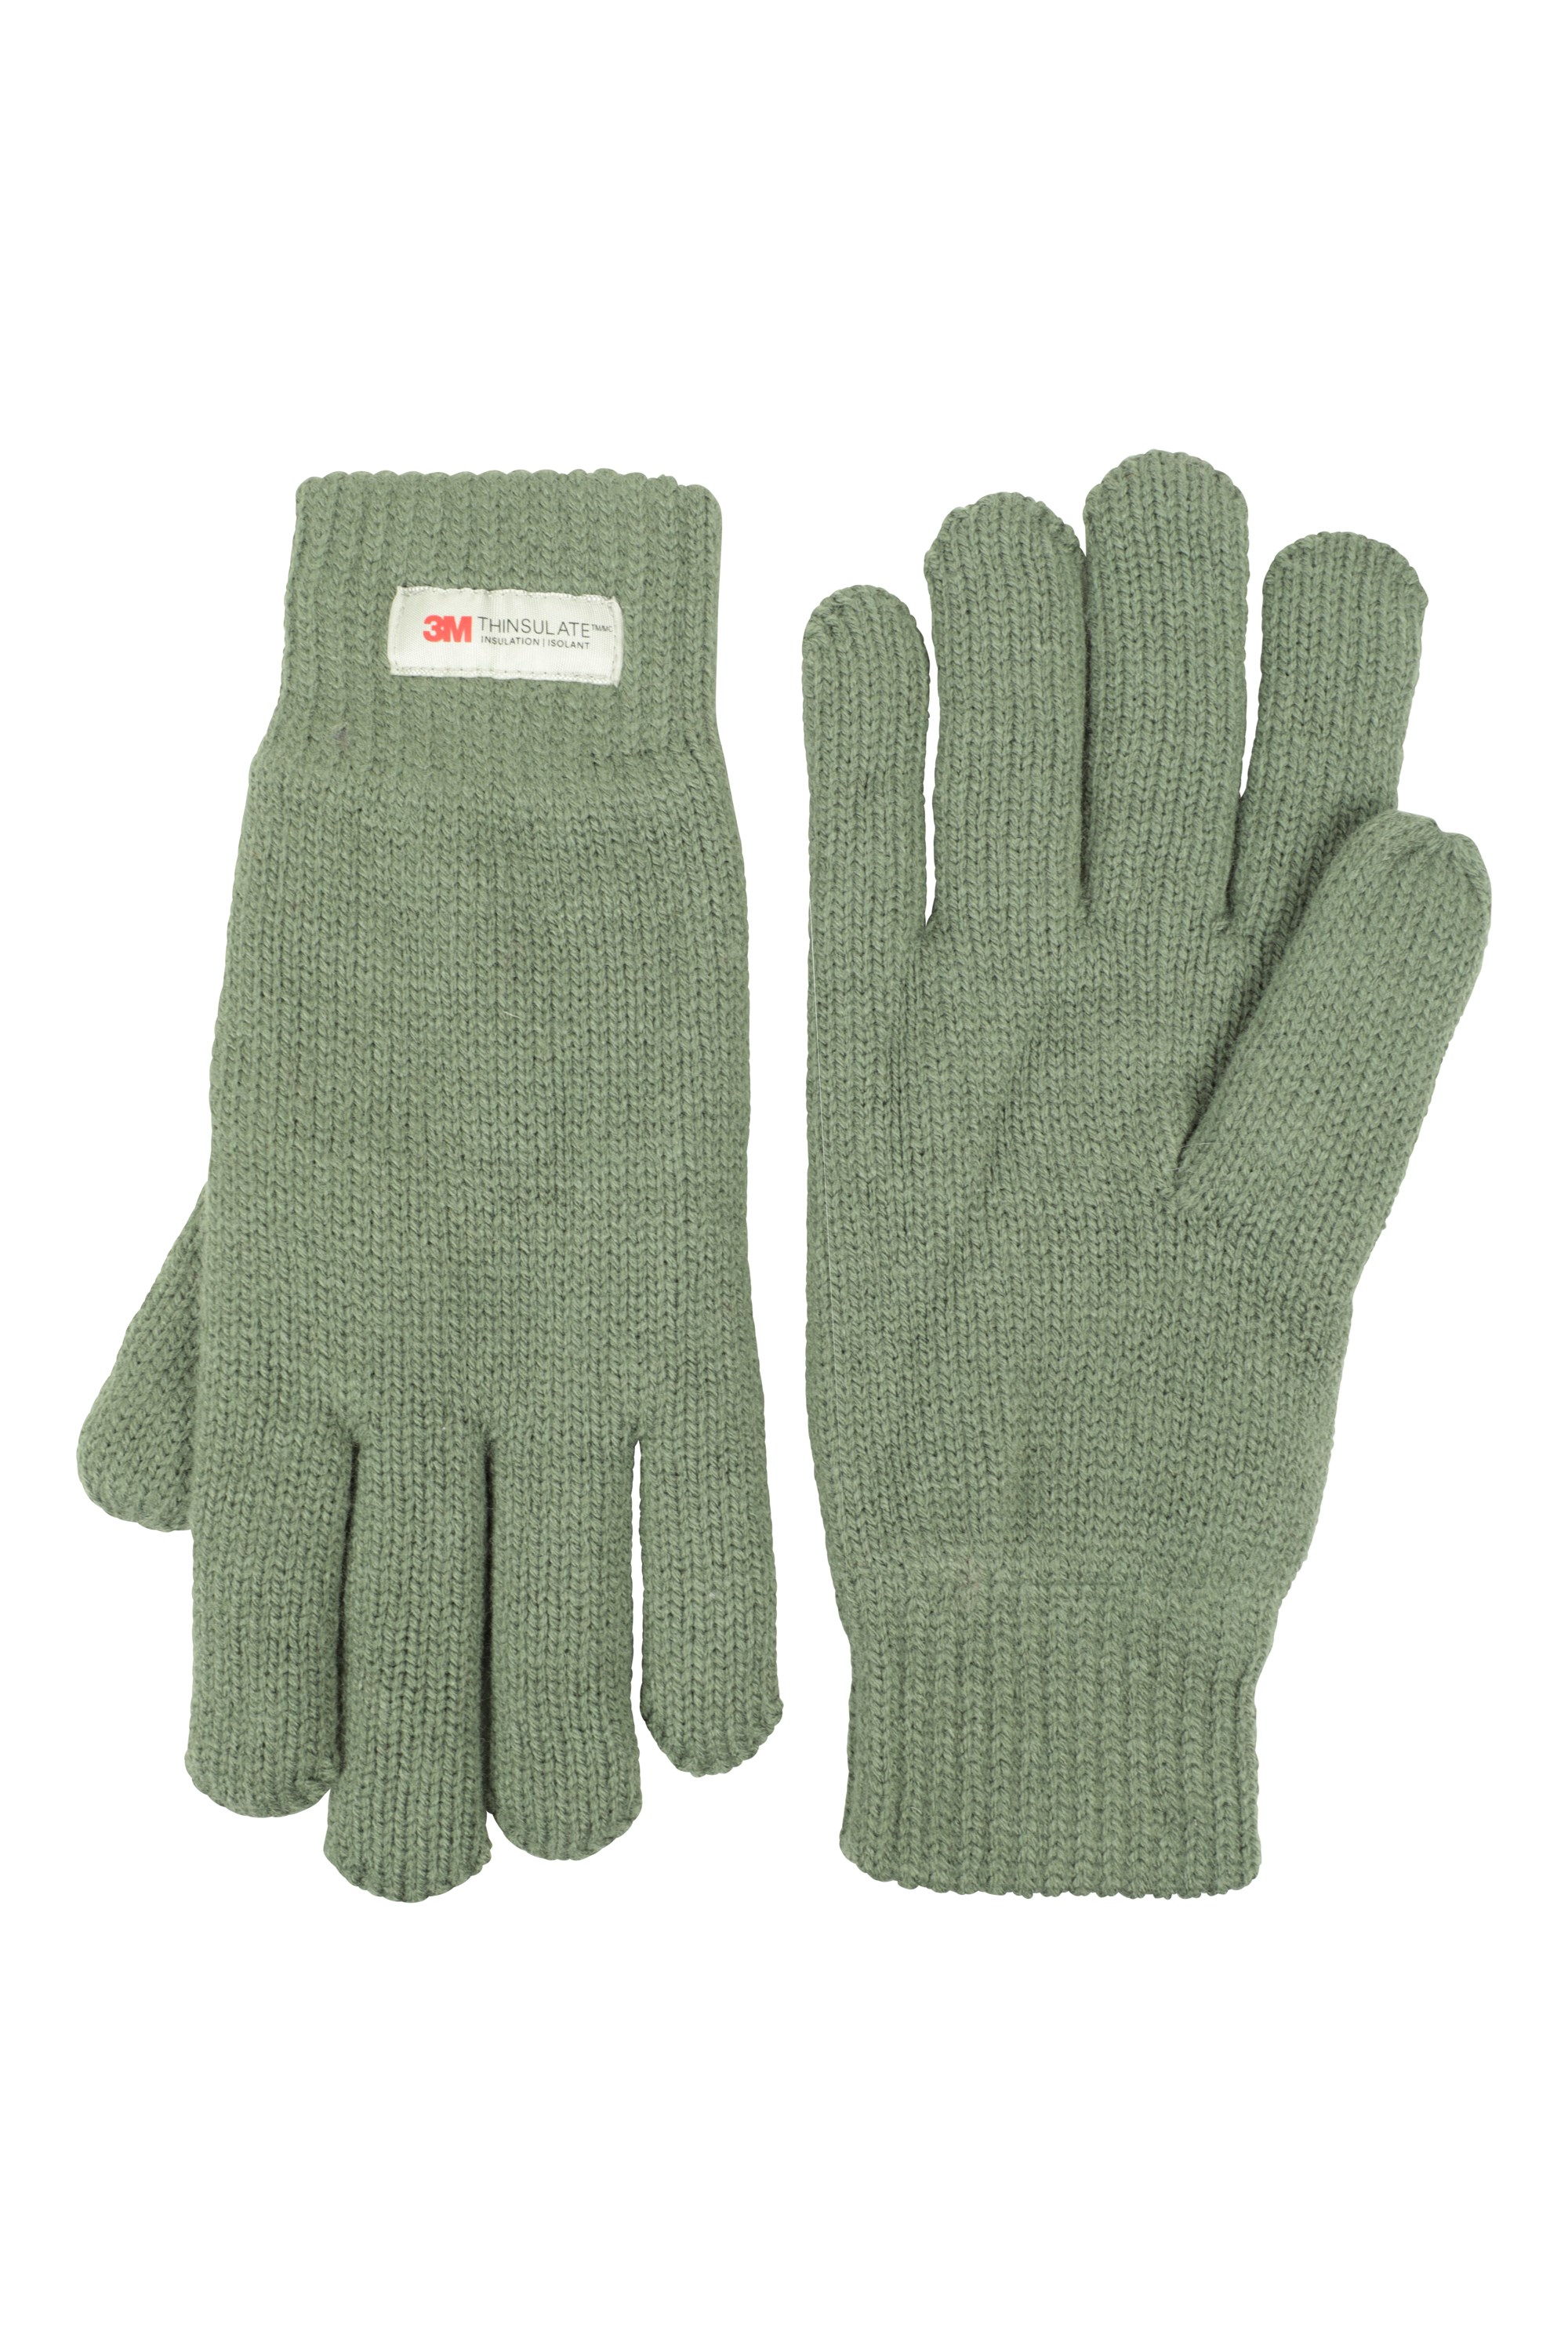 Thinsulate Womens Knitted Gloves - Green